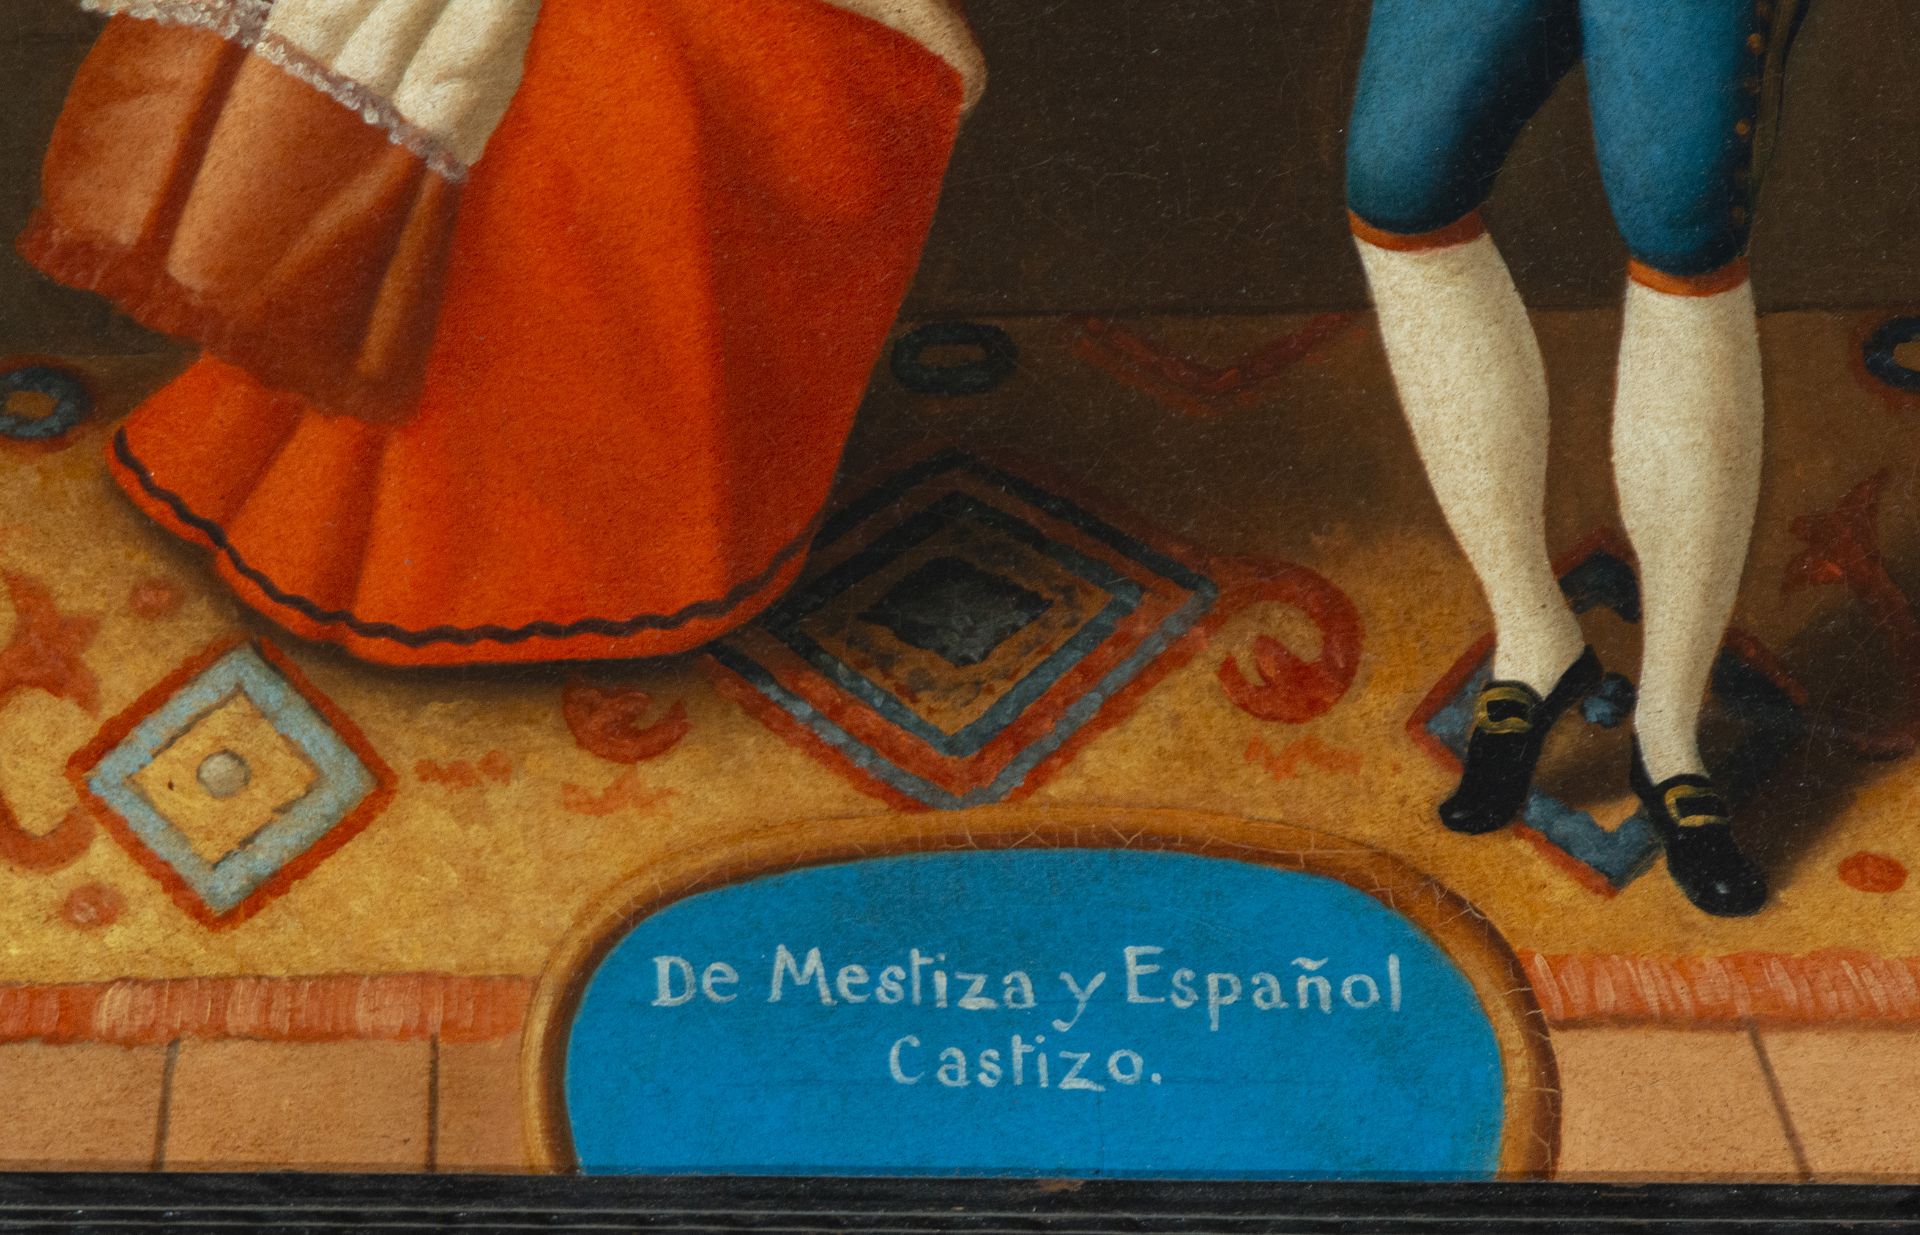 Scene of Mexican castes, according to models of Mexican colonial art of the 19th century - Image 3 of 5